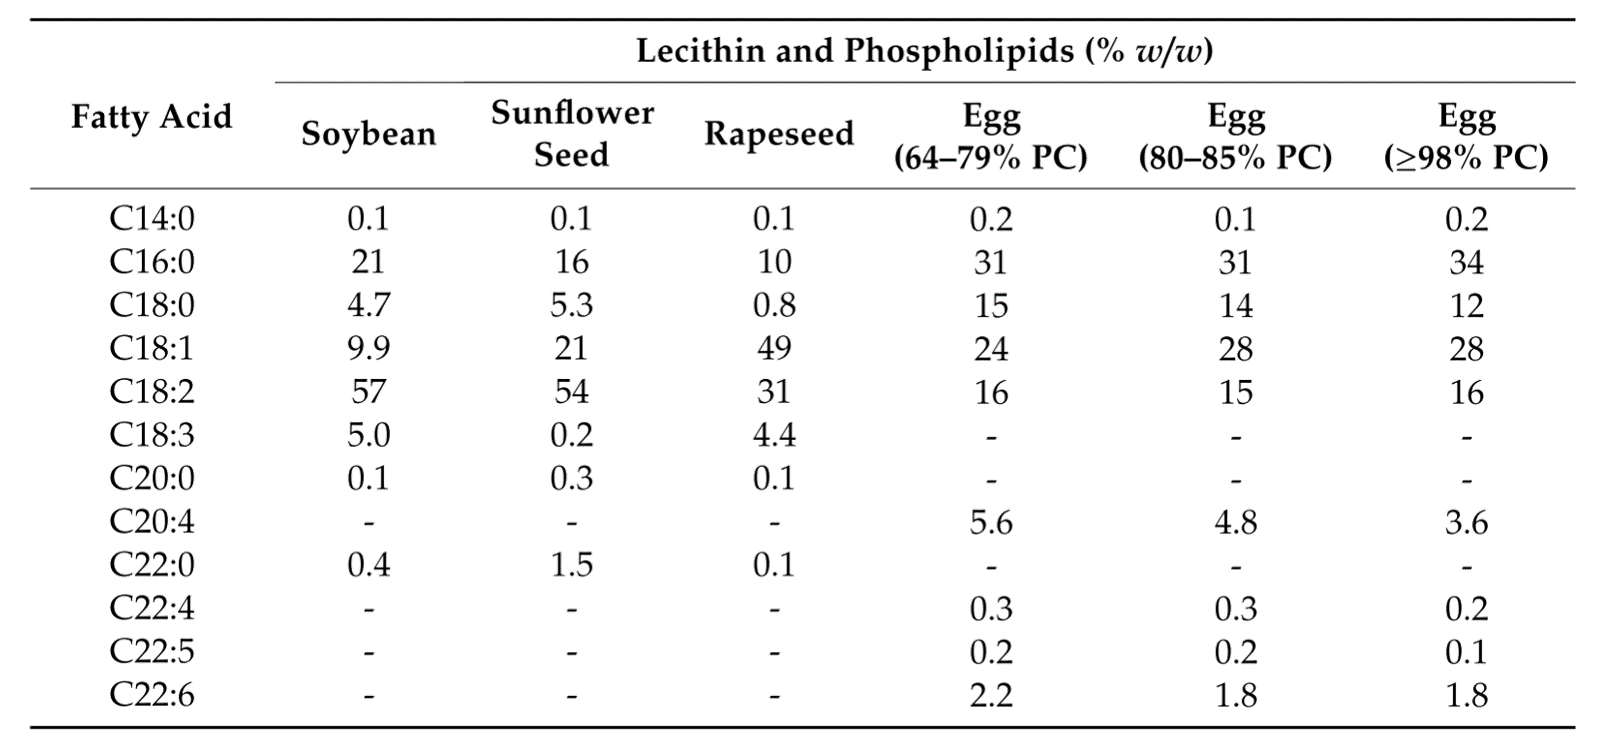 Fatty acid composition of vegetable de-oiled lecithins and egg phospholipids of different PC contents